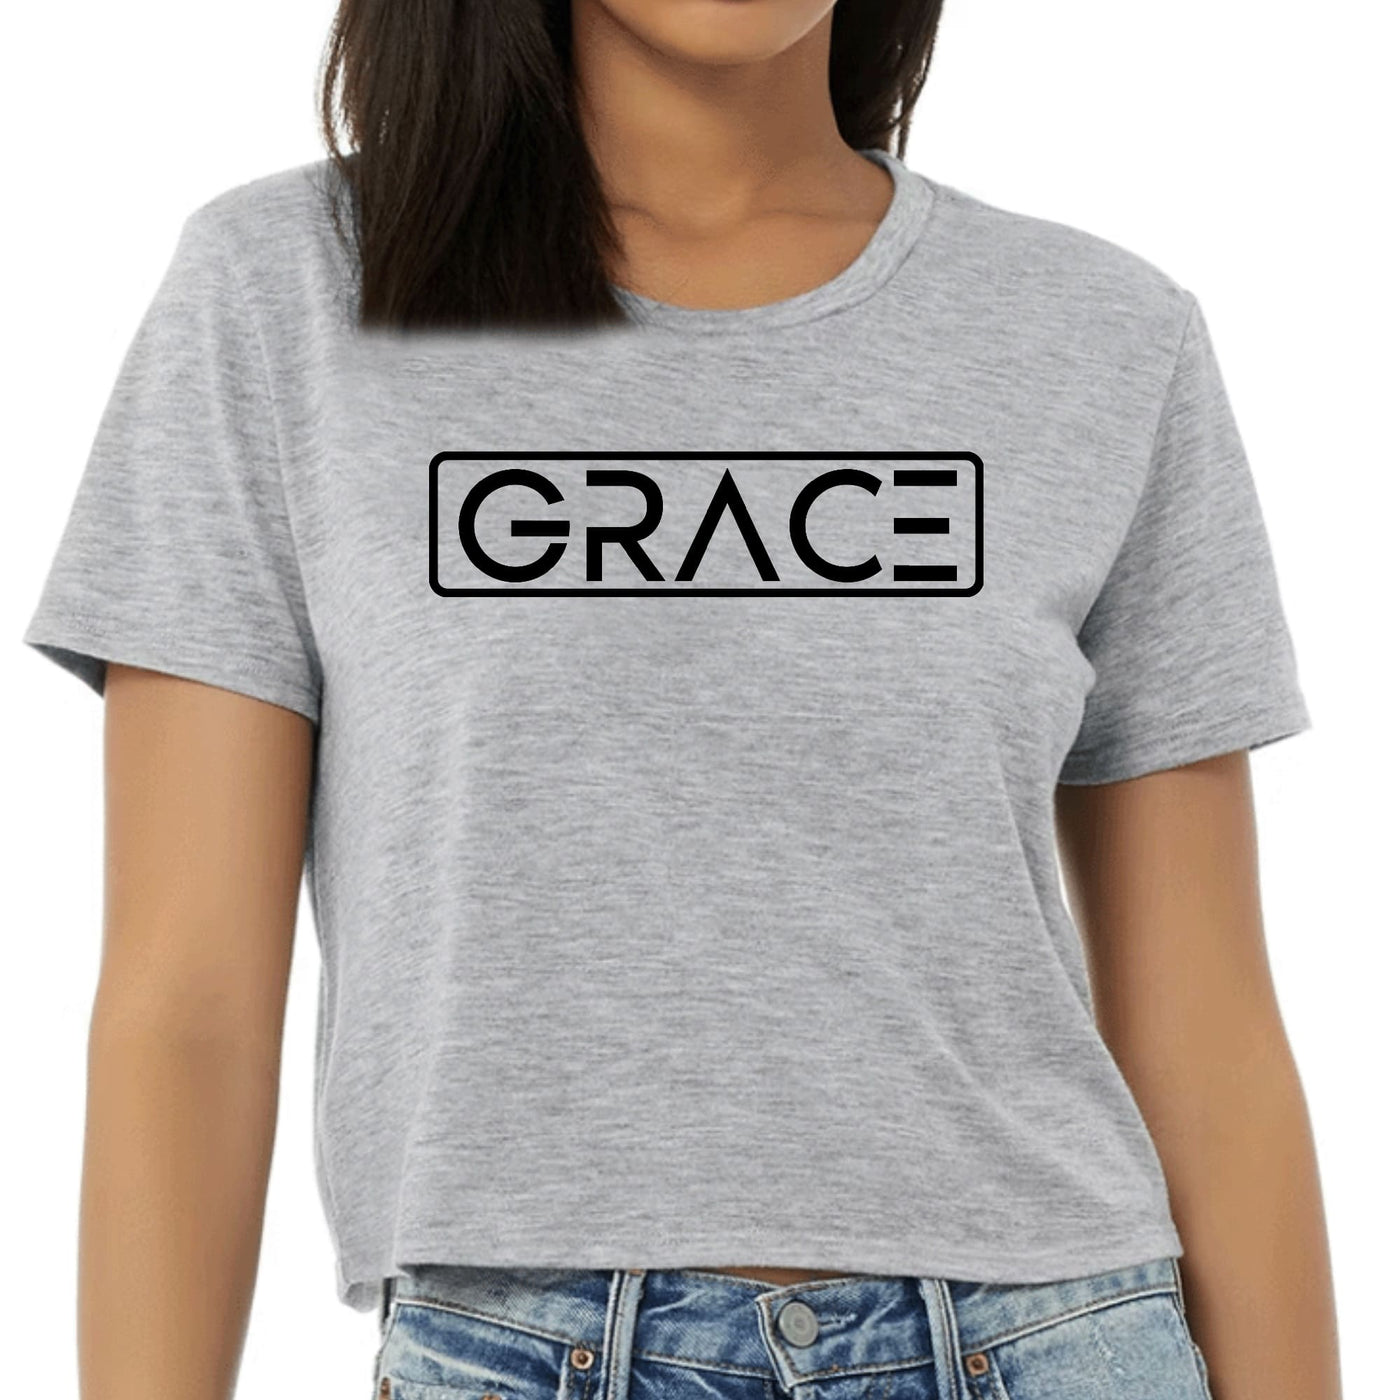 Womens Cropped Graphic T-shirt Grace Christian Black Illustration - Womens